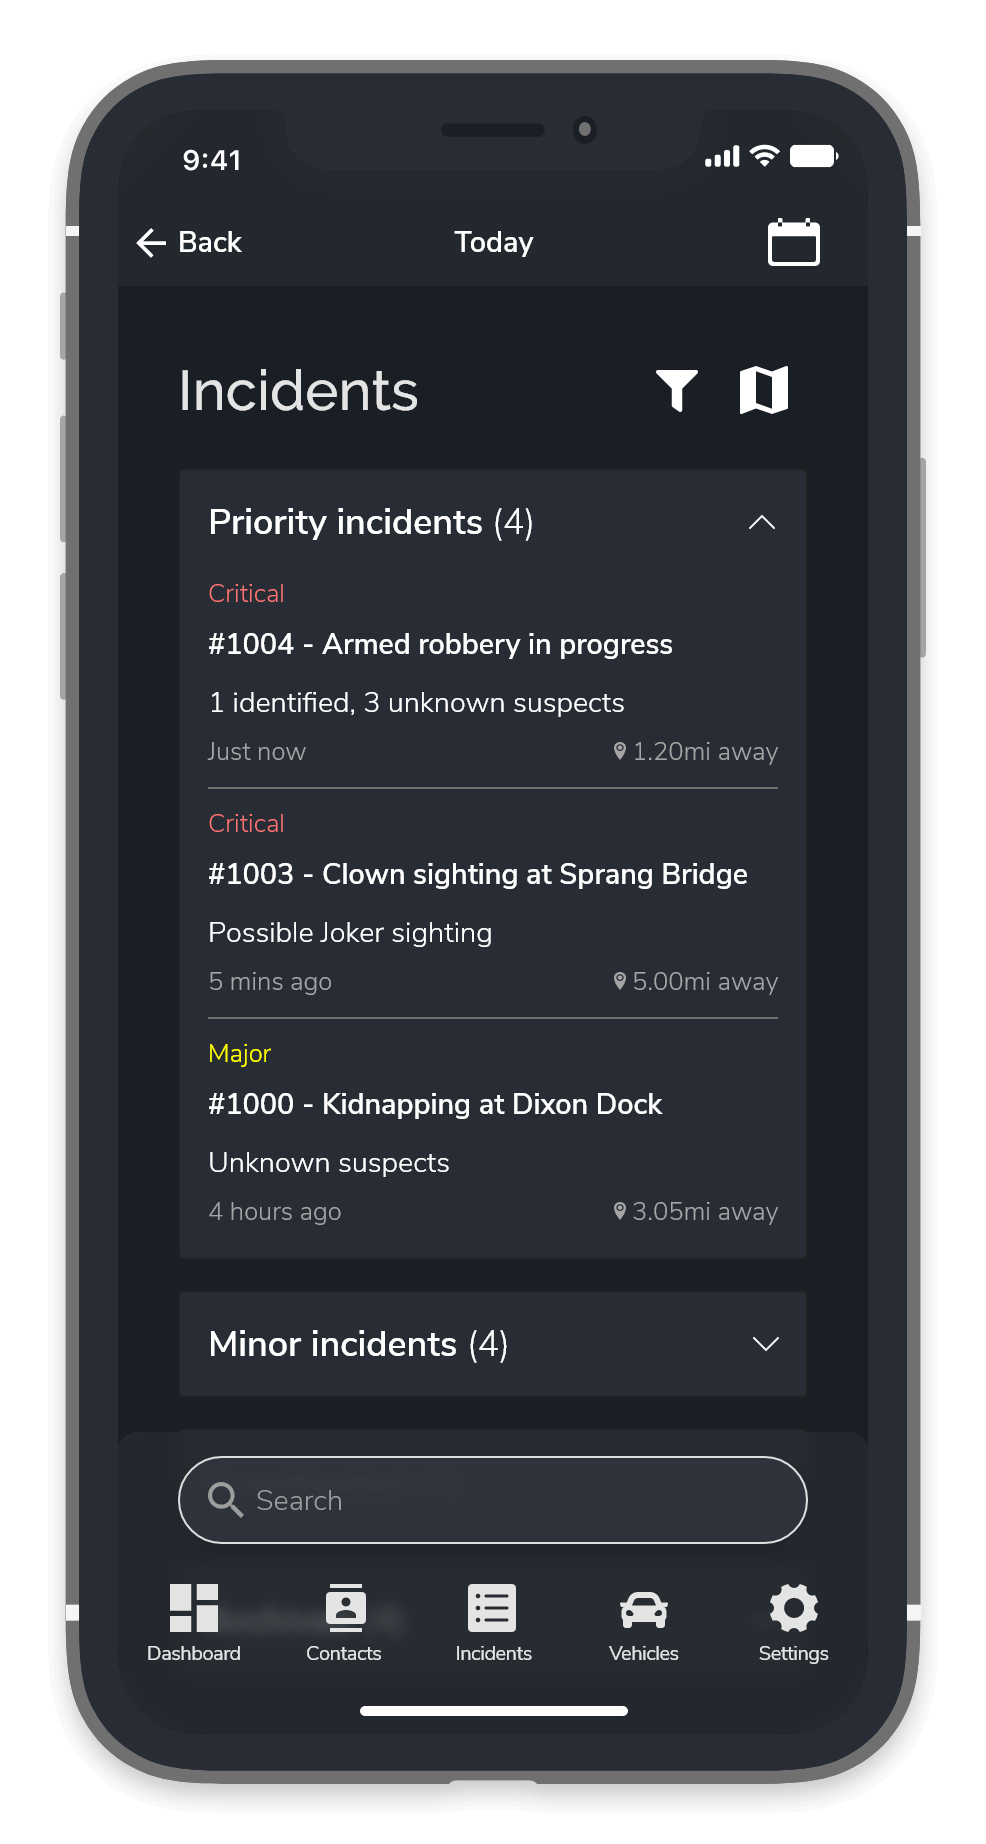 A screenshot of the incident list with incidents ranked by priority.